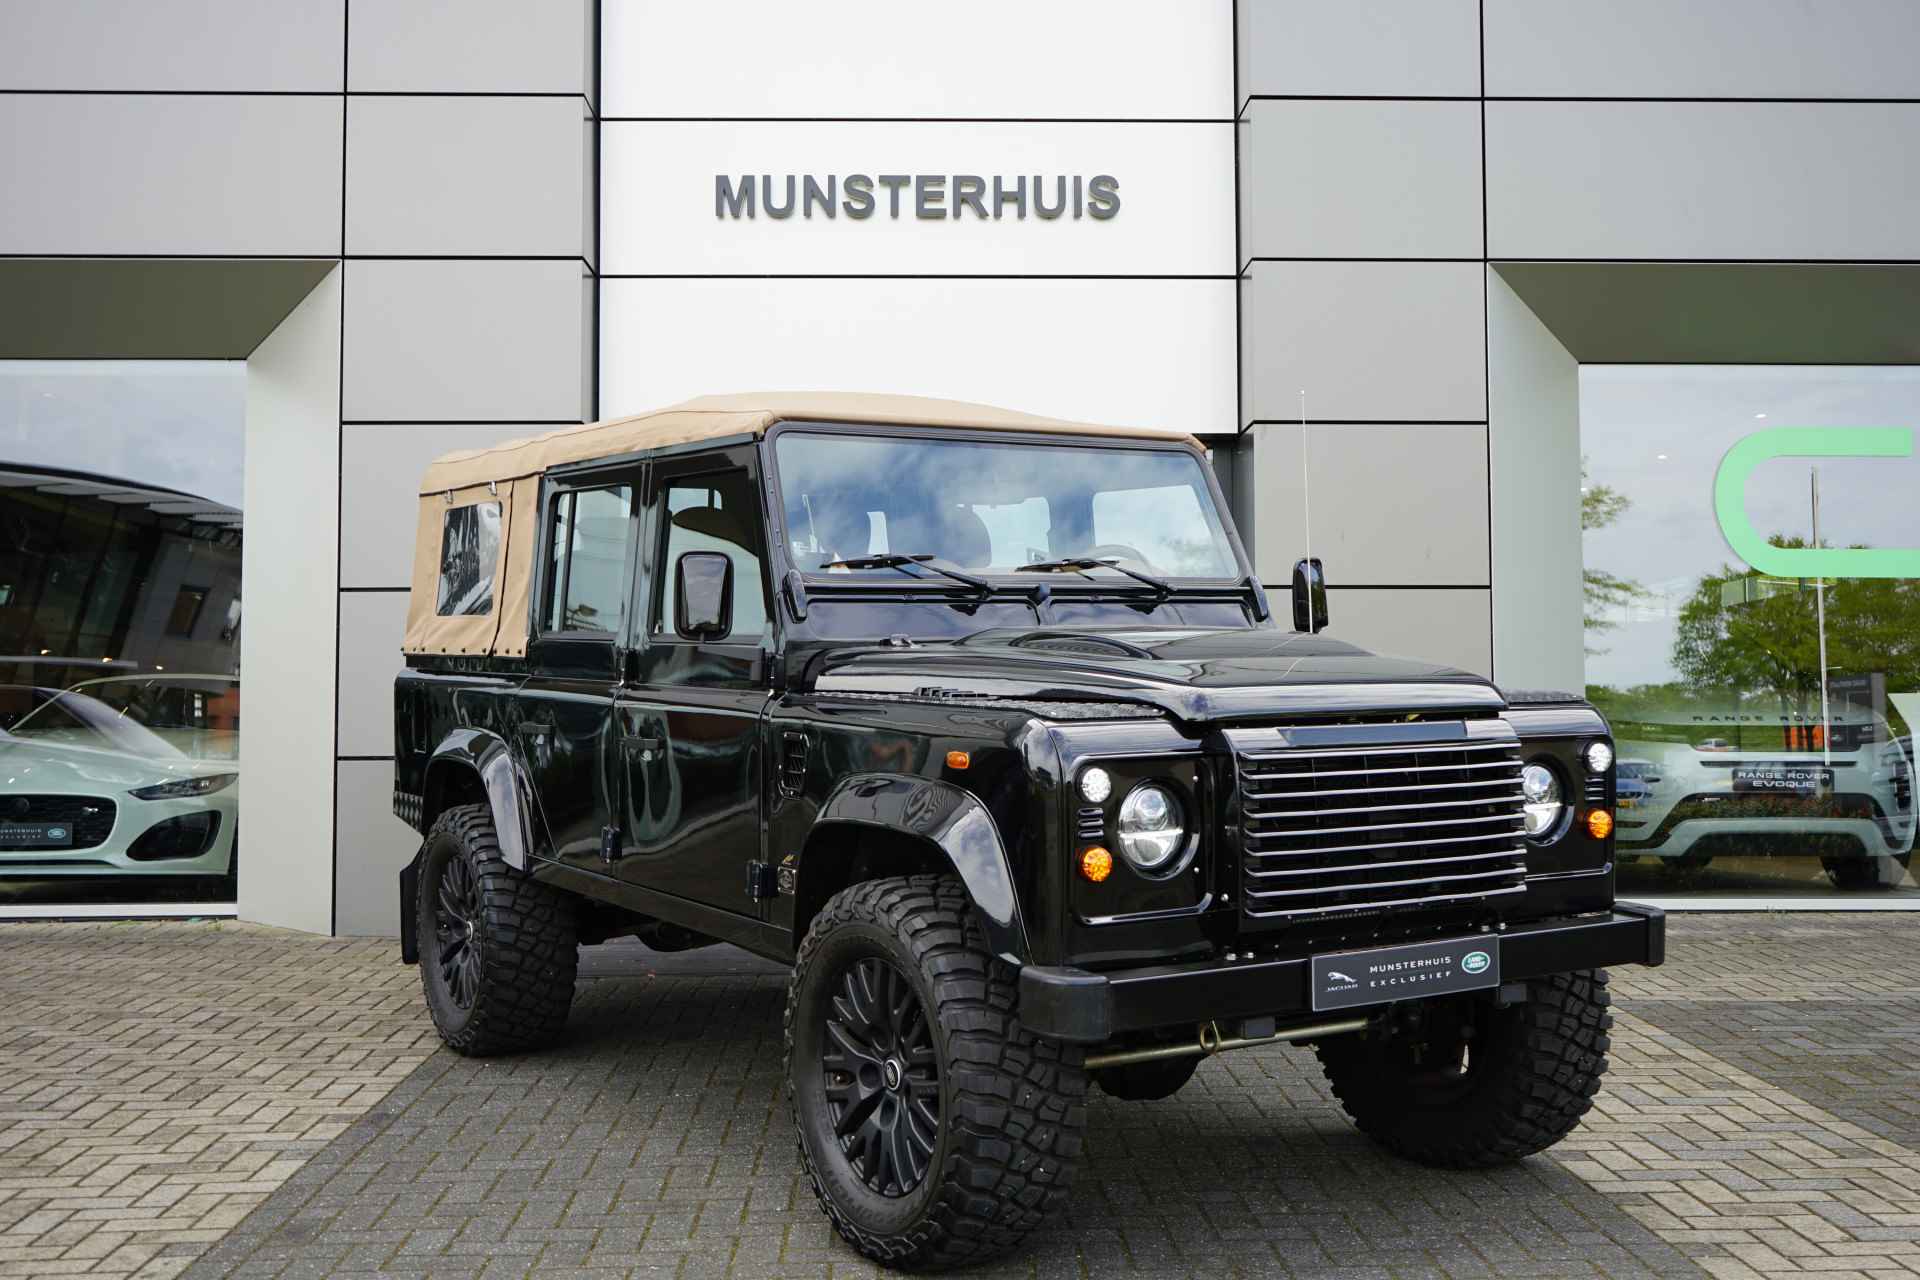 Land Rover Defender 2.4 TD 110 SW Convertible Brand New - River House Rebuild, Butterscotch Leather, BF Goodridge Tyres - 10/26